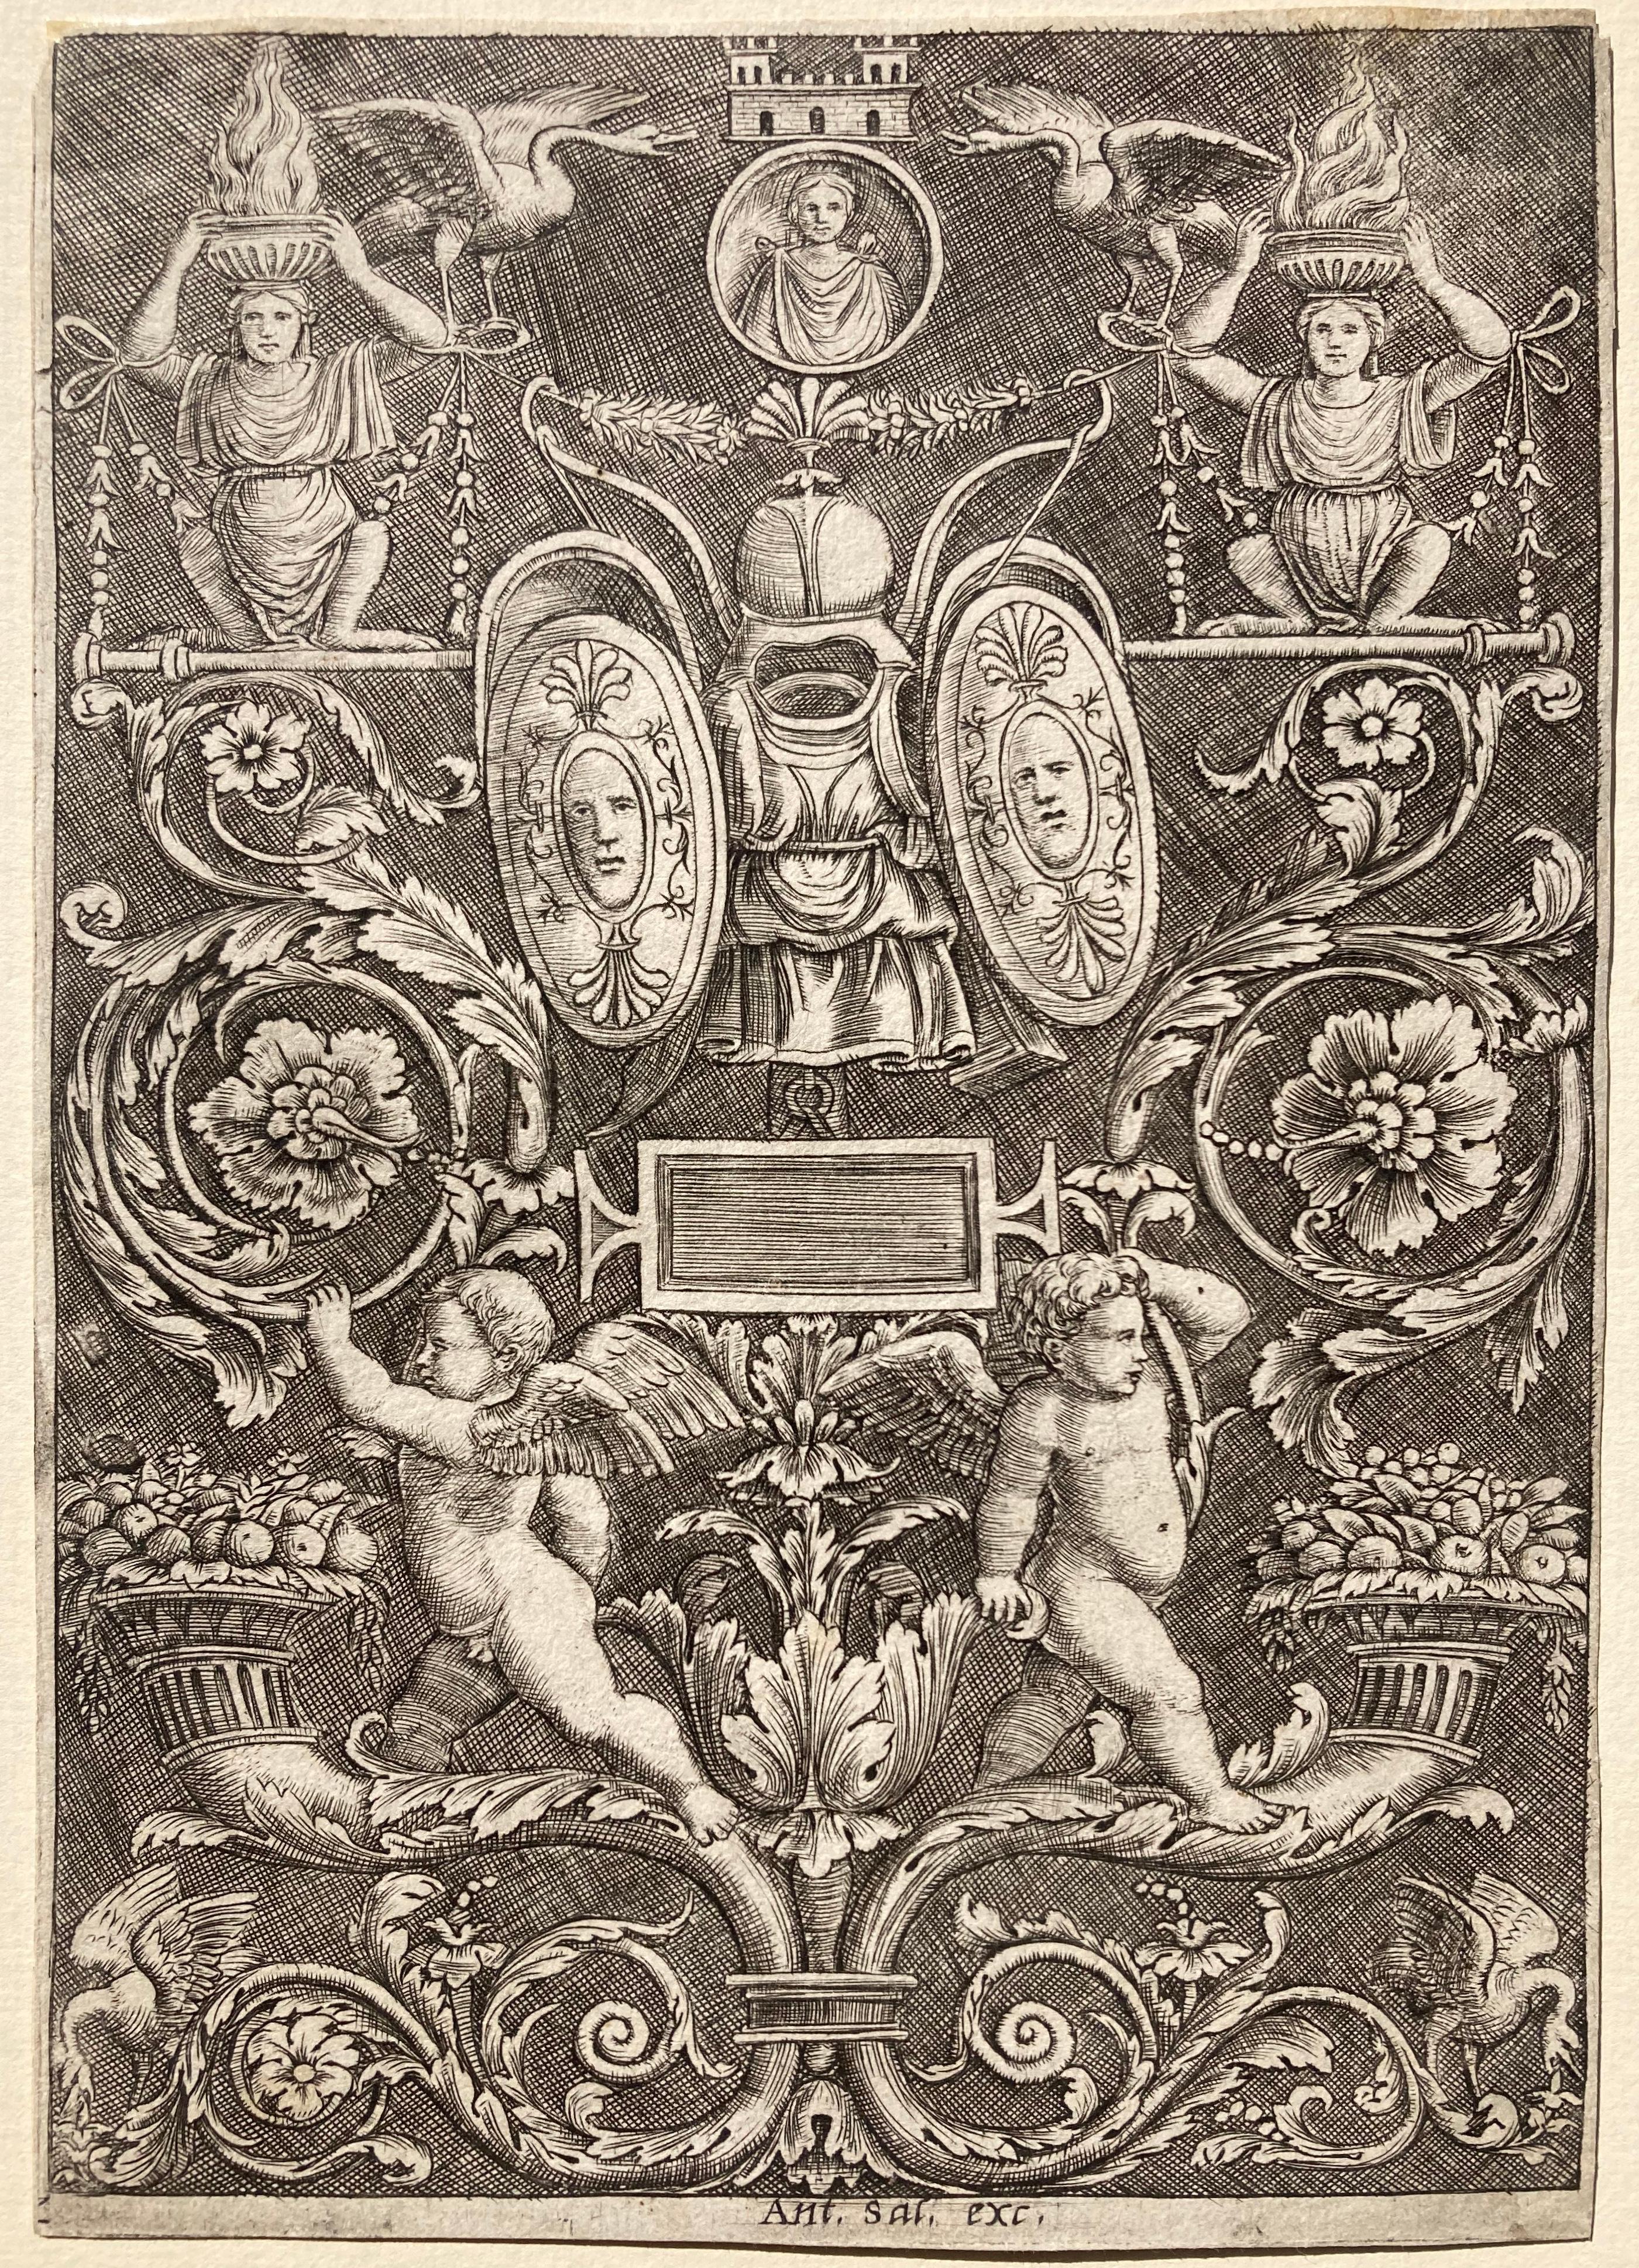 A Panel of Ornament, Putti Standing on Cornucopia in Lower Section